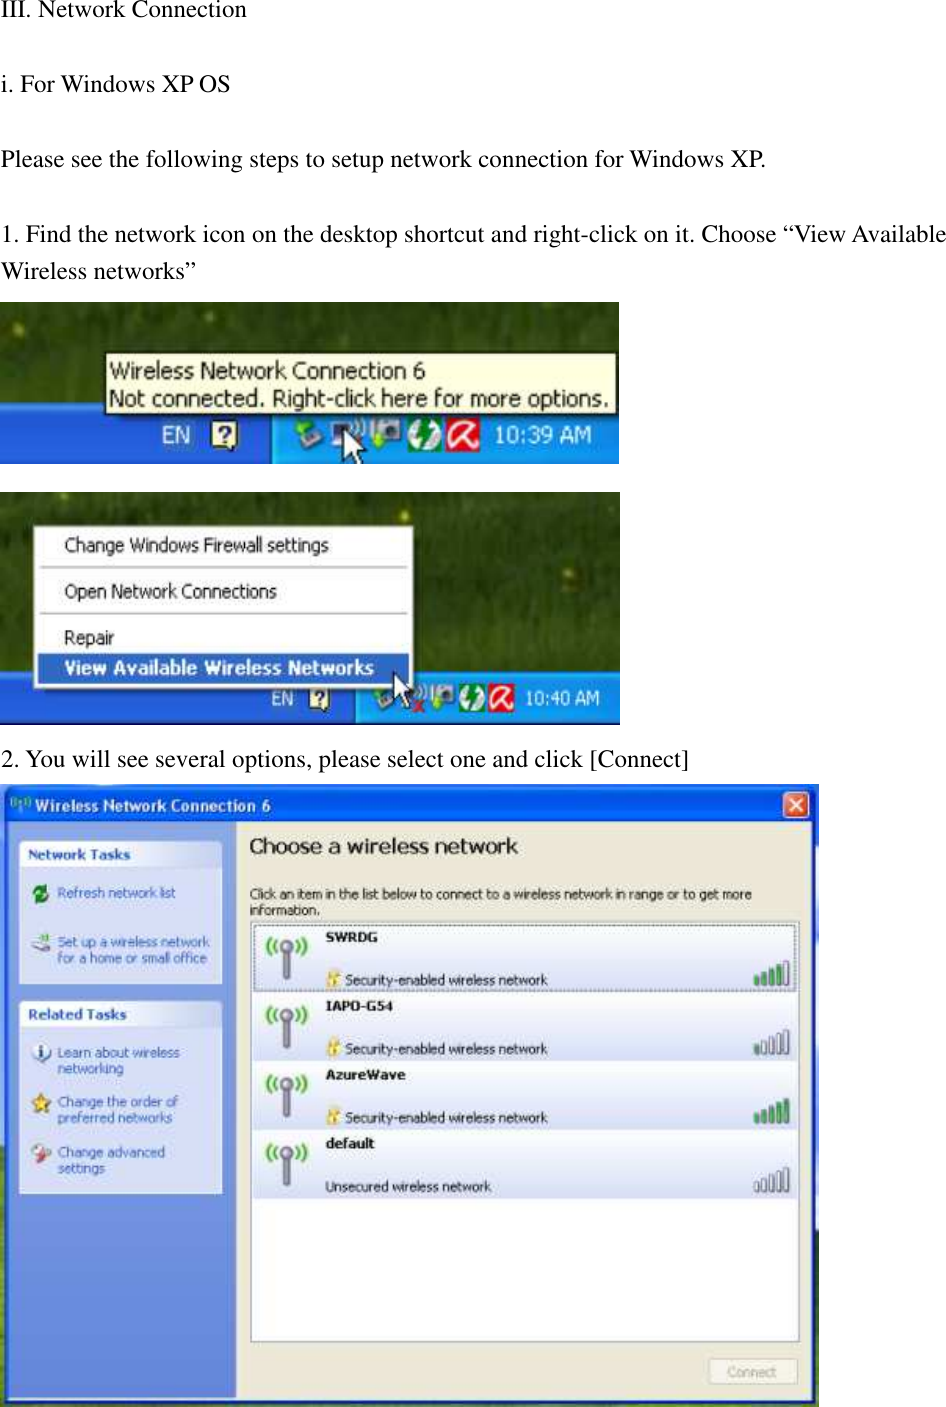 III. Network Connection  i. For Windows XP OS  Please see the following steps to setup network connection for Windows XP.  1. Find the network icon on the desktop shortcut and right-click on it. Choose “View Available Wireless networks”   2. You will see several options, please select one and click [Connect]      